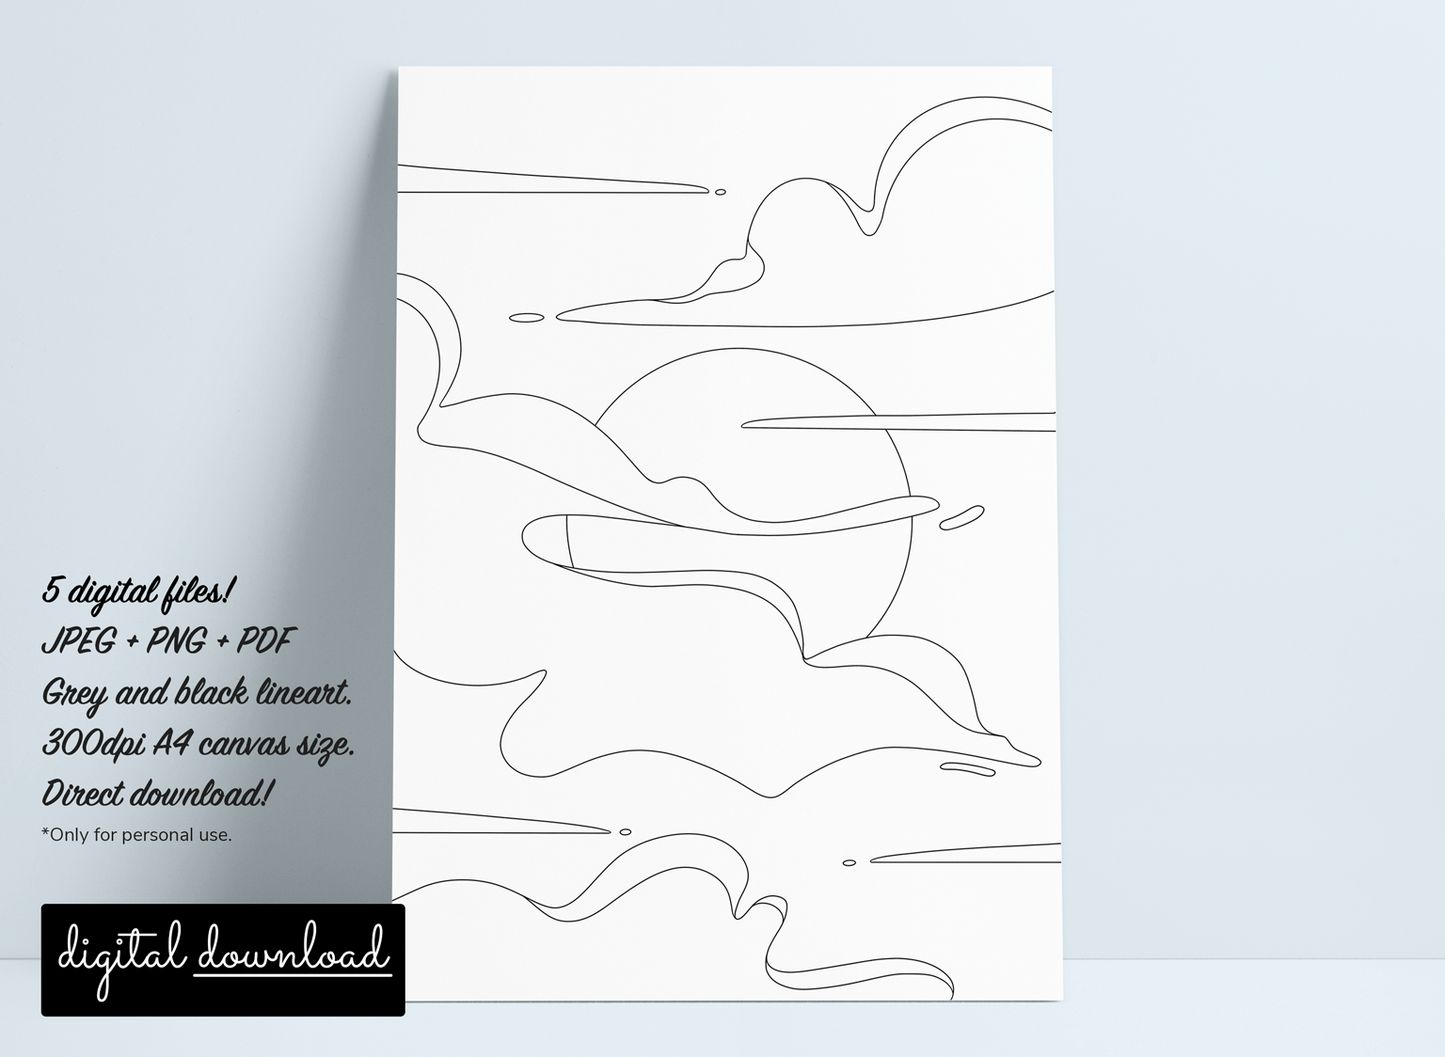 Printable colouring page with a big sun and clouds design.